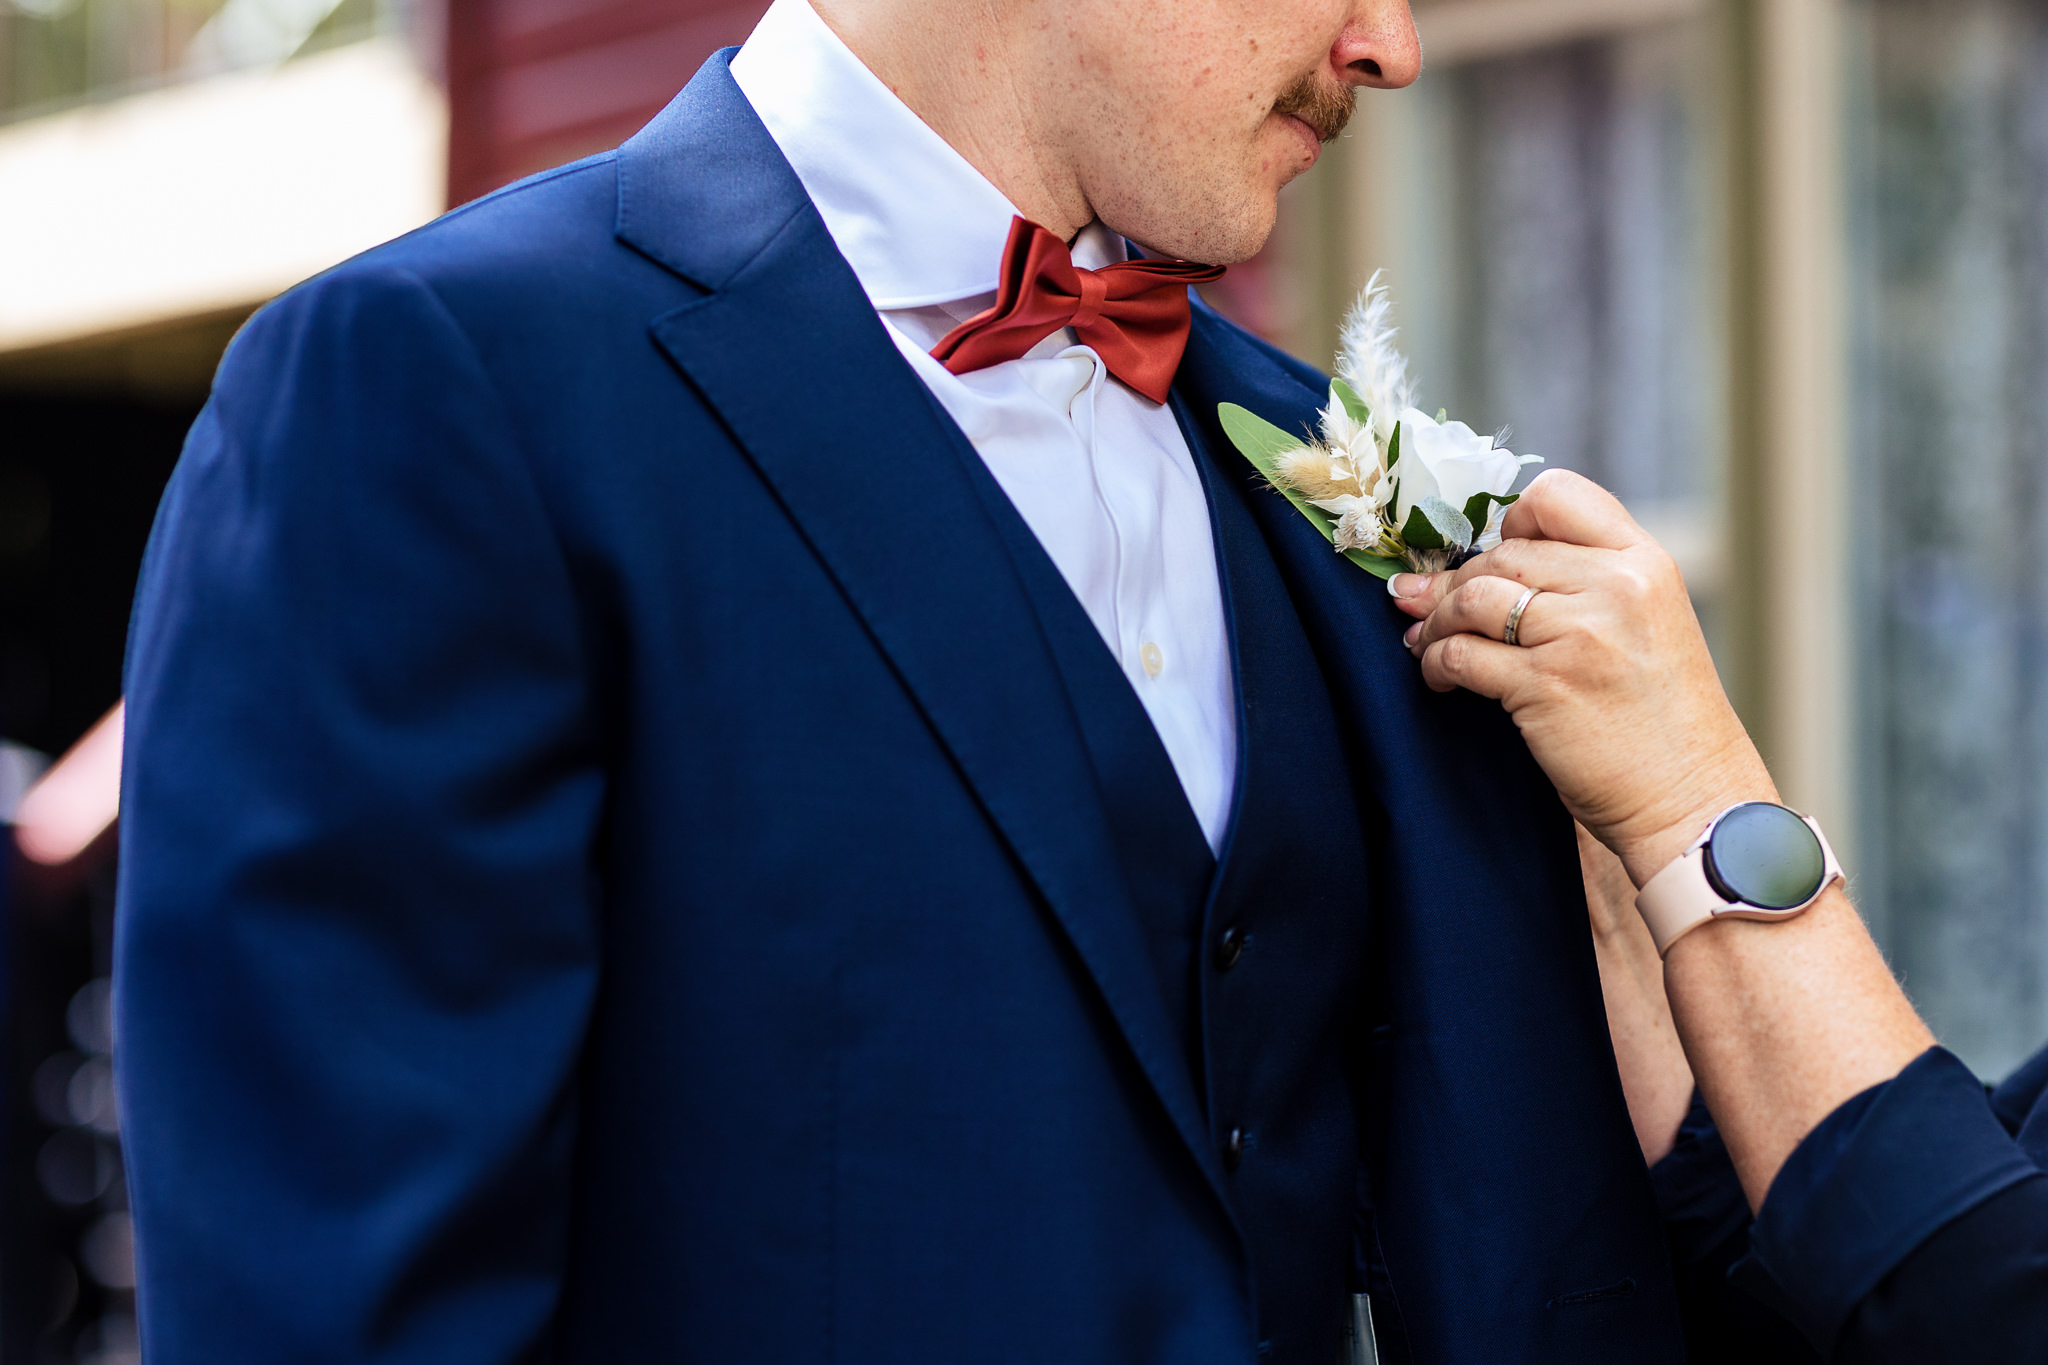 Photo of the groom having his boutonniere pinned on for Haley & Gytenis' Summer Wedding at The McCreery House by Colorado Wedding Photographer, Jennifer Garza.